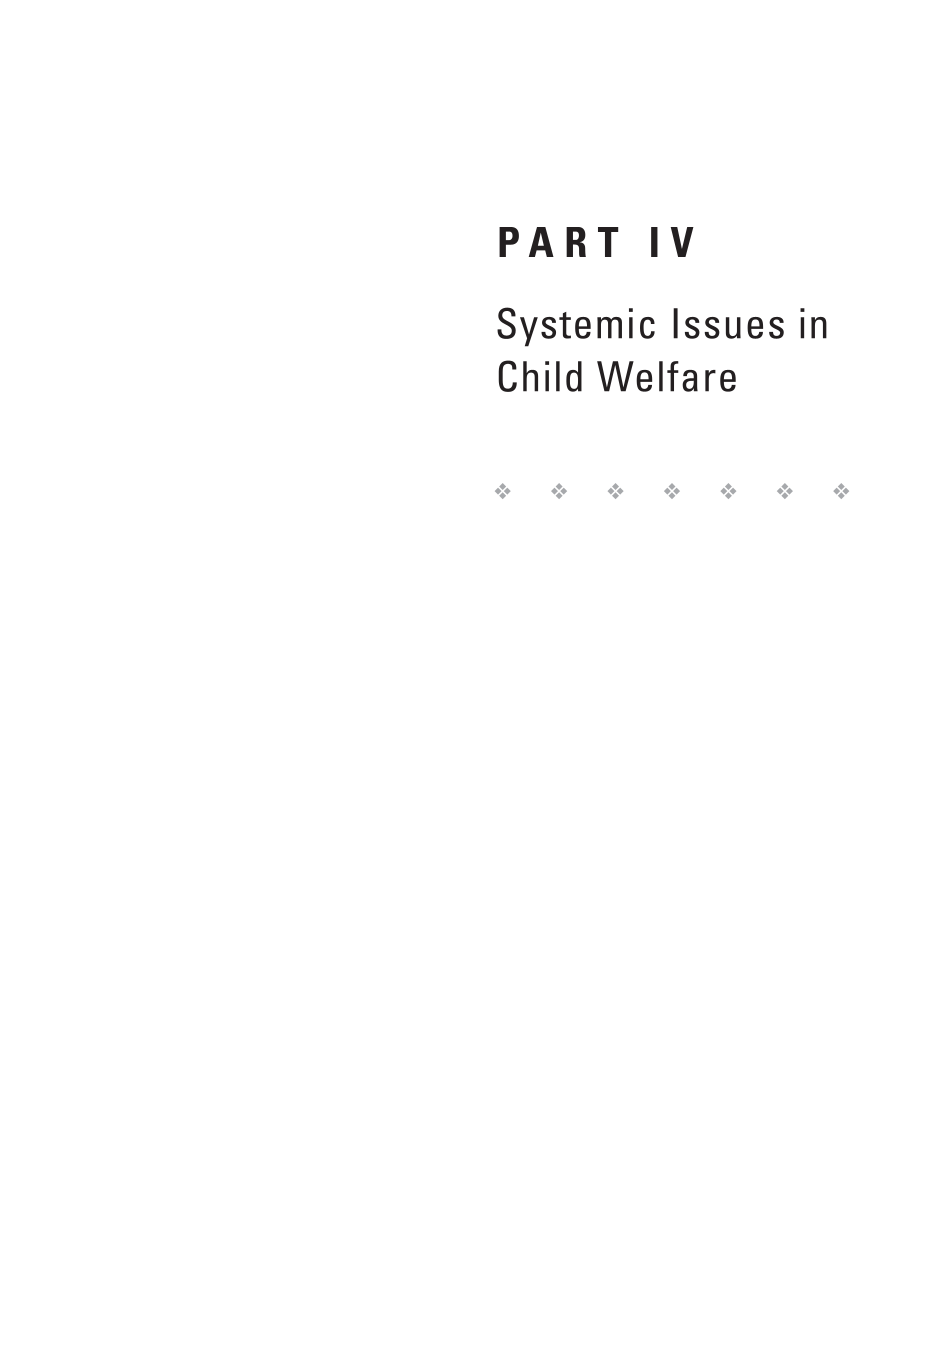 Child Welfare for the Twenty-first Century: A Handbook of Practices, Policies, and Programs, second edition page 559